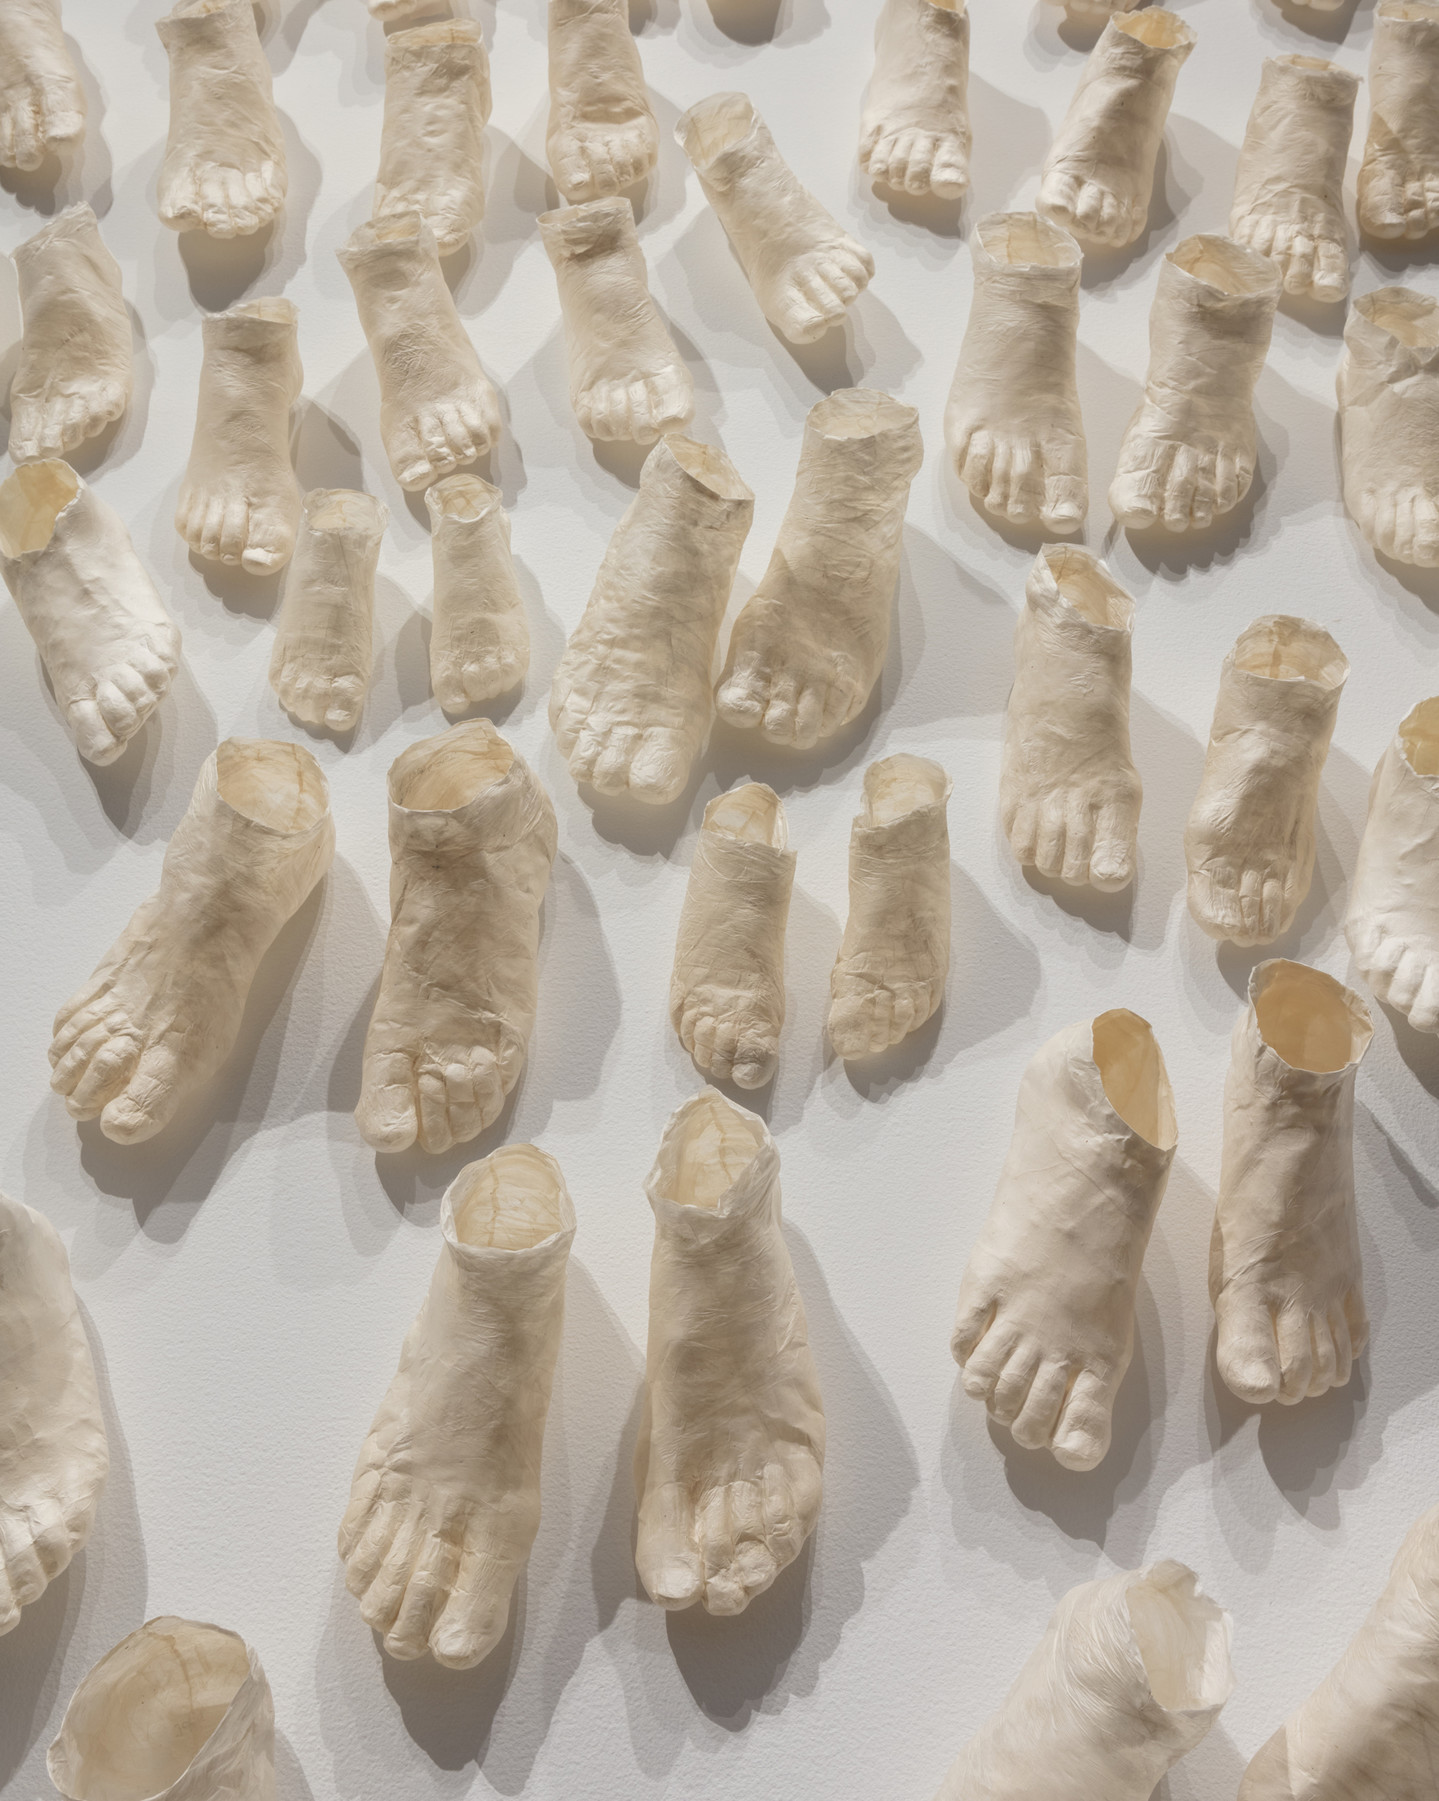 Dozens of pale, hollow, ghostly feet of different sizes made of translucent paper arrayed in pairs on a white background.